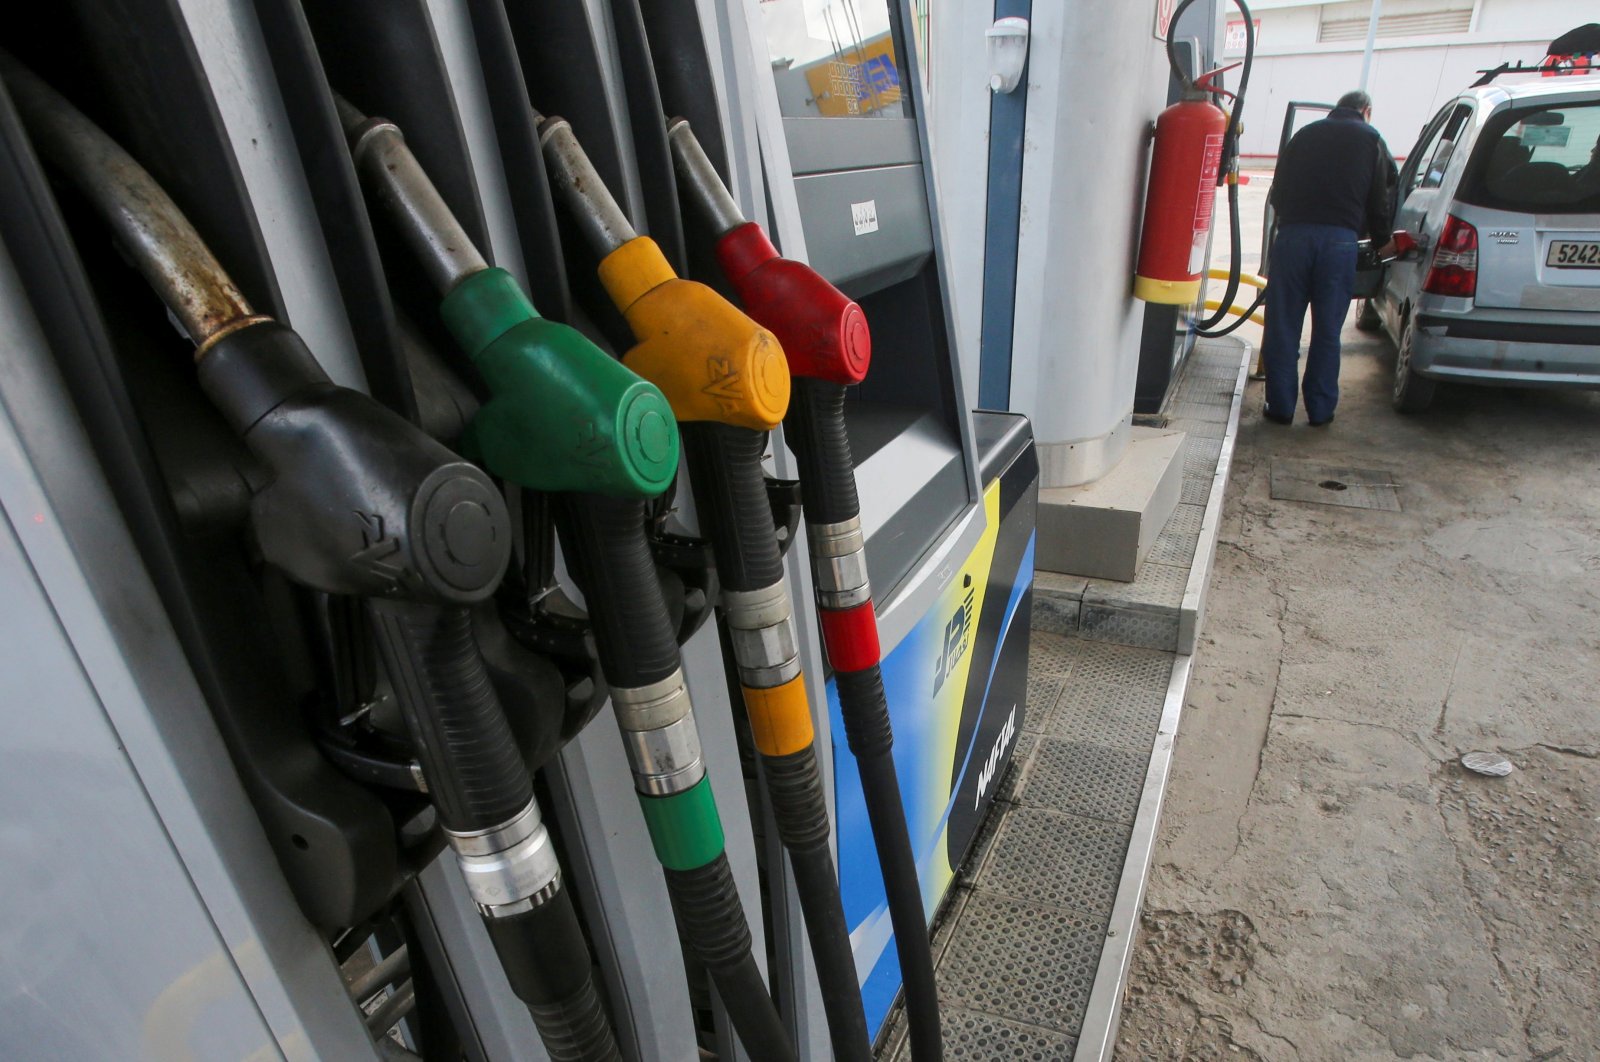 Pump nozzles are pictured at a gas station in Algiers, Algeria, April 21, 2020. (Reuters File Photo)